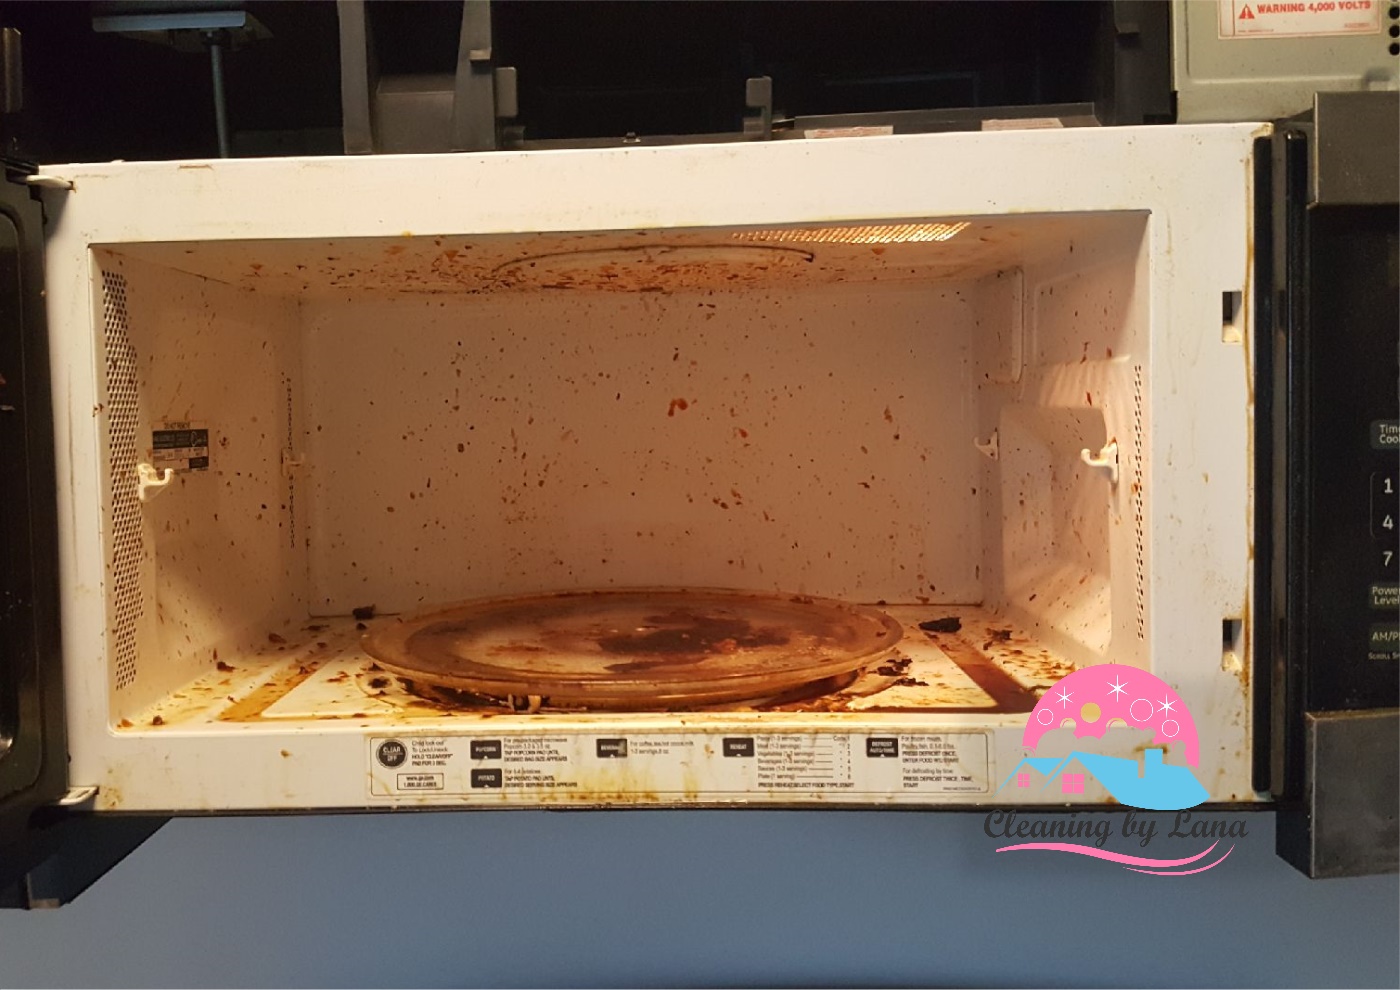 Microwave before cleaning